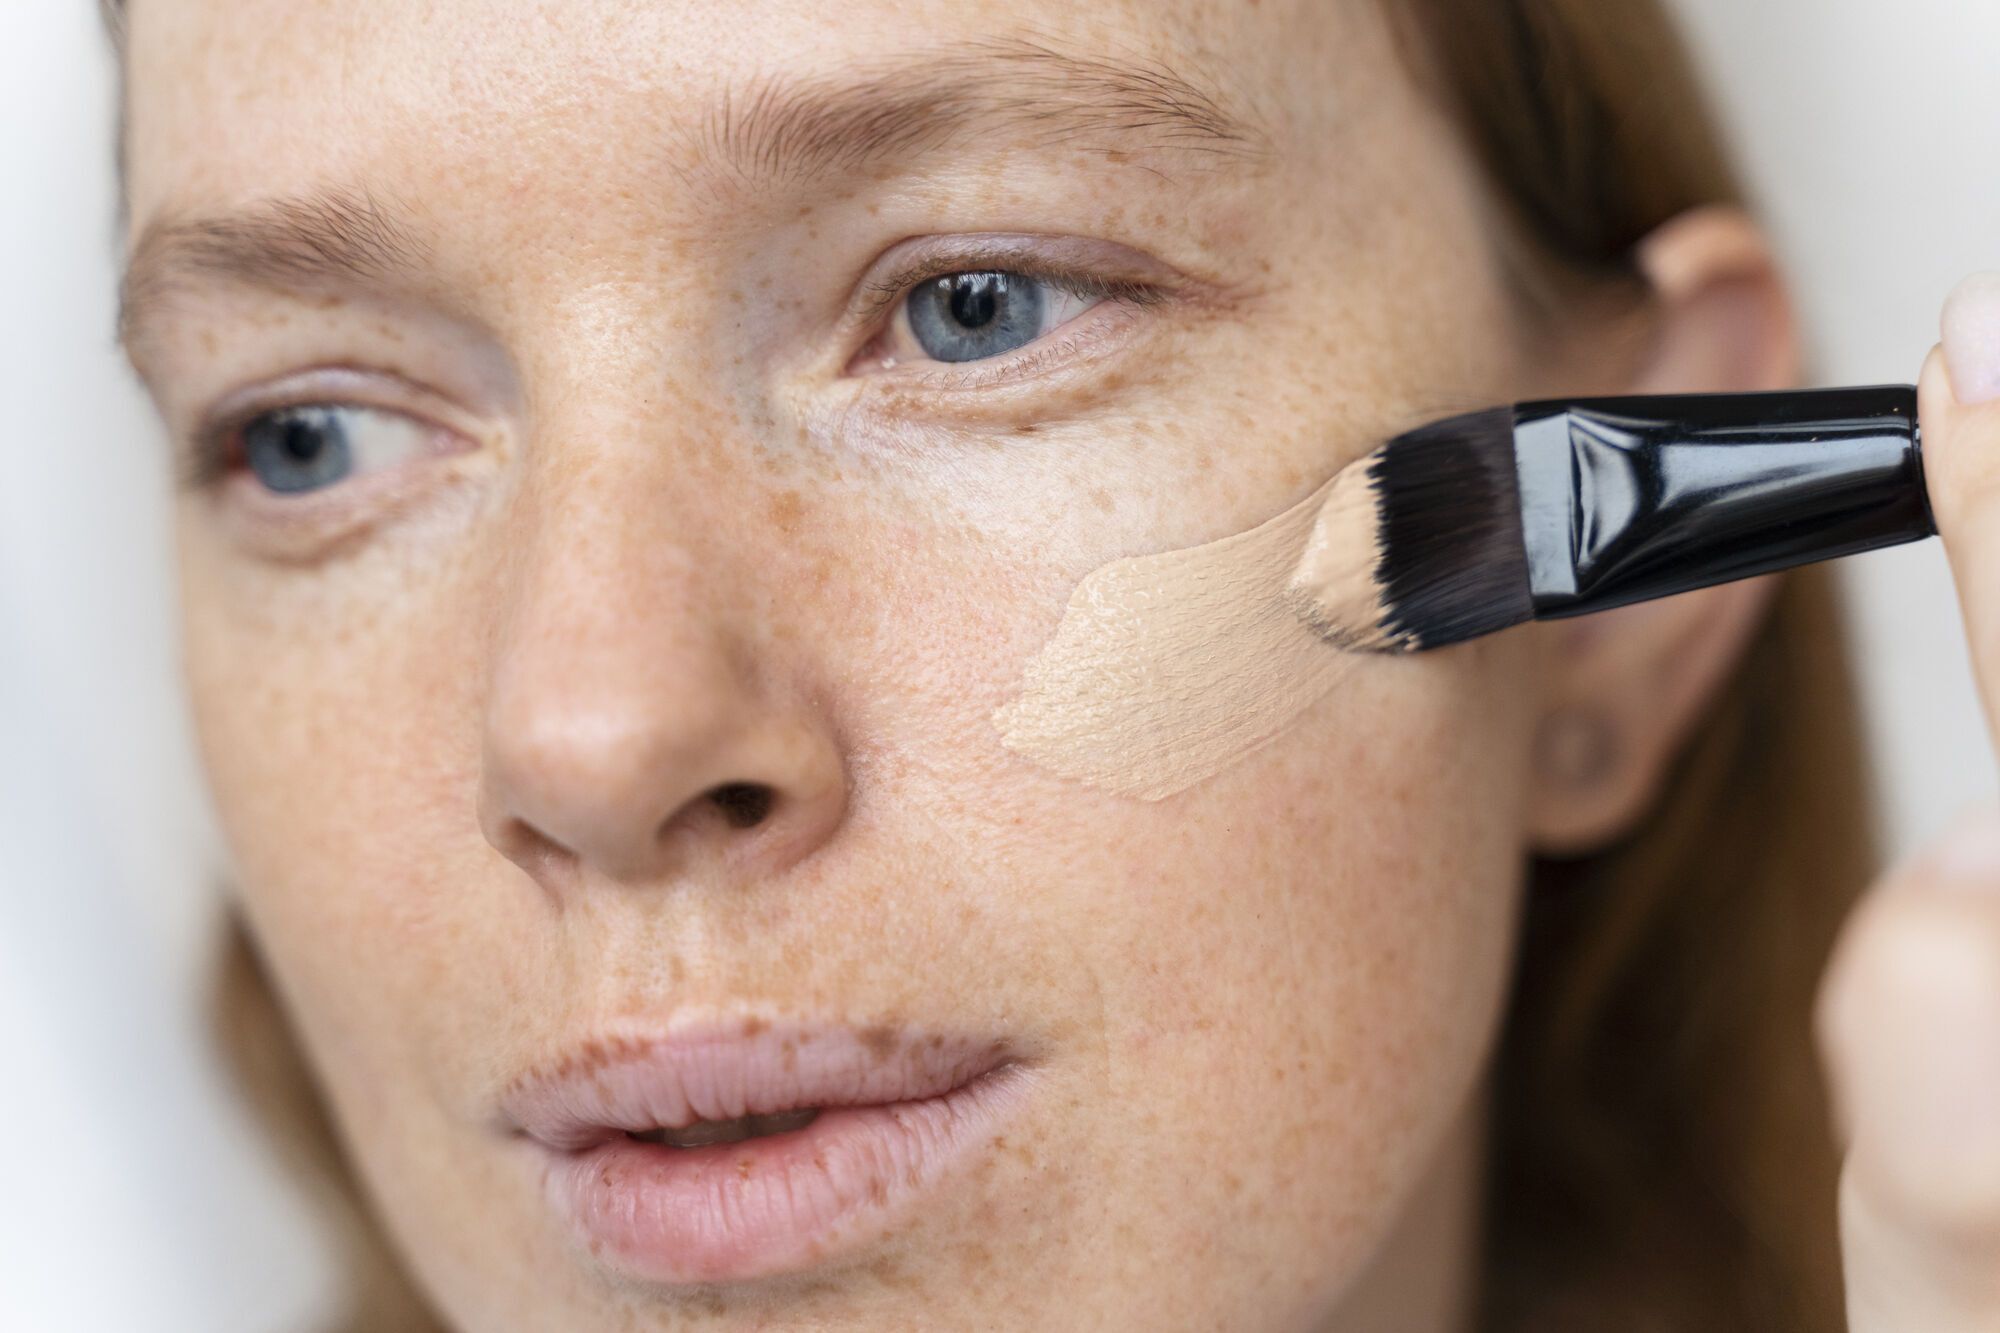 Perfect coverage: a life hack that will change your makeup forever